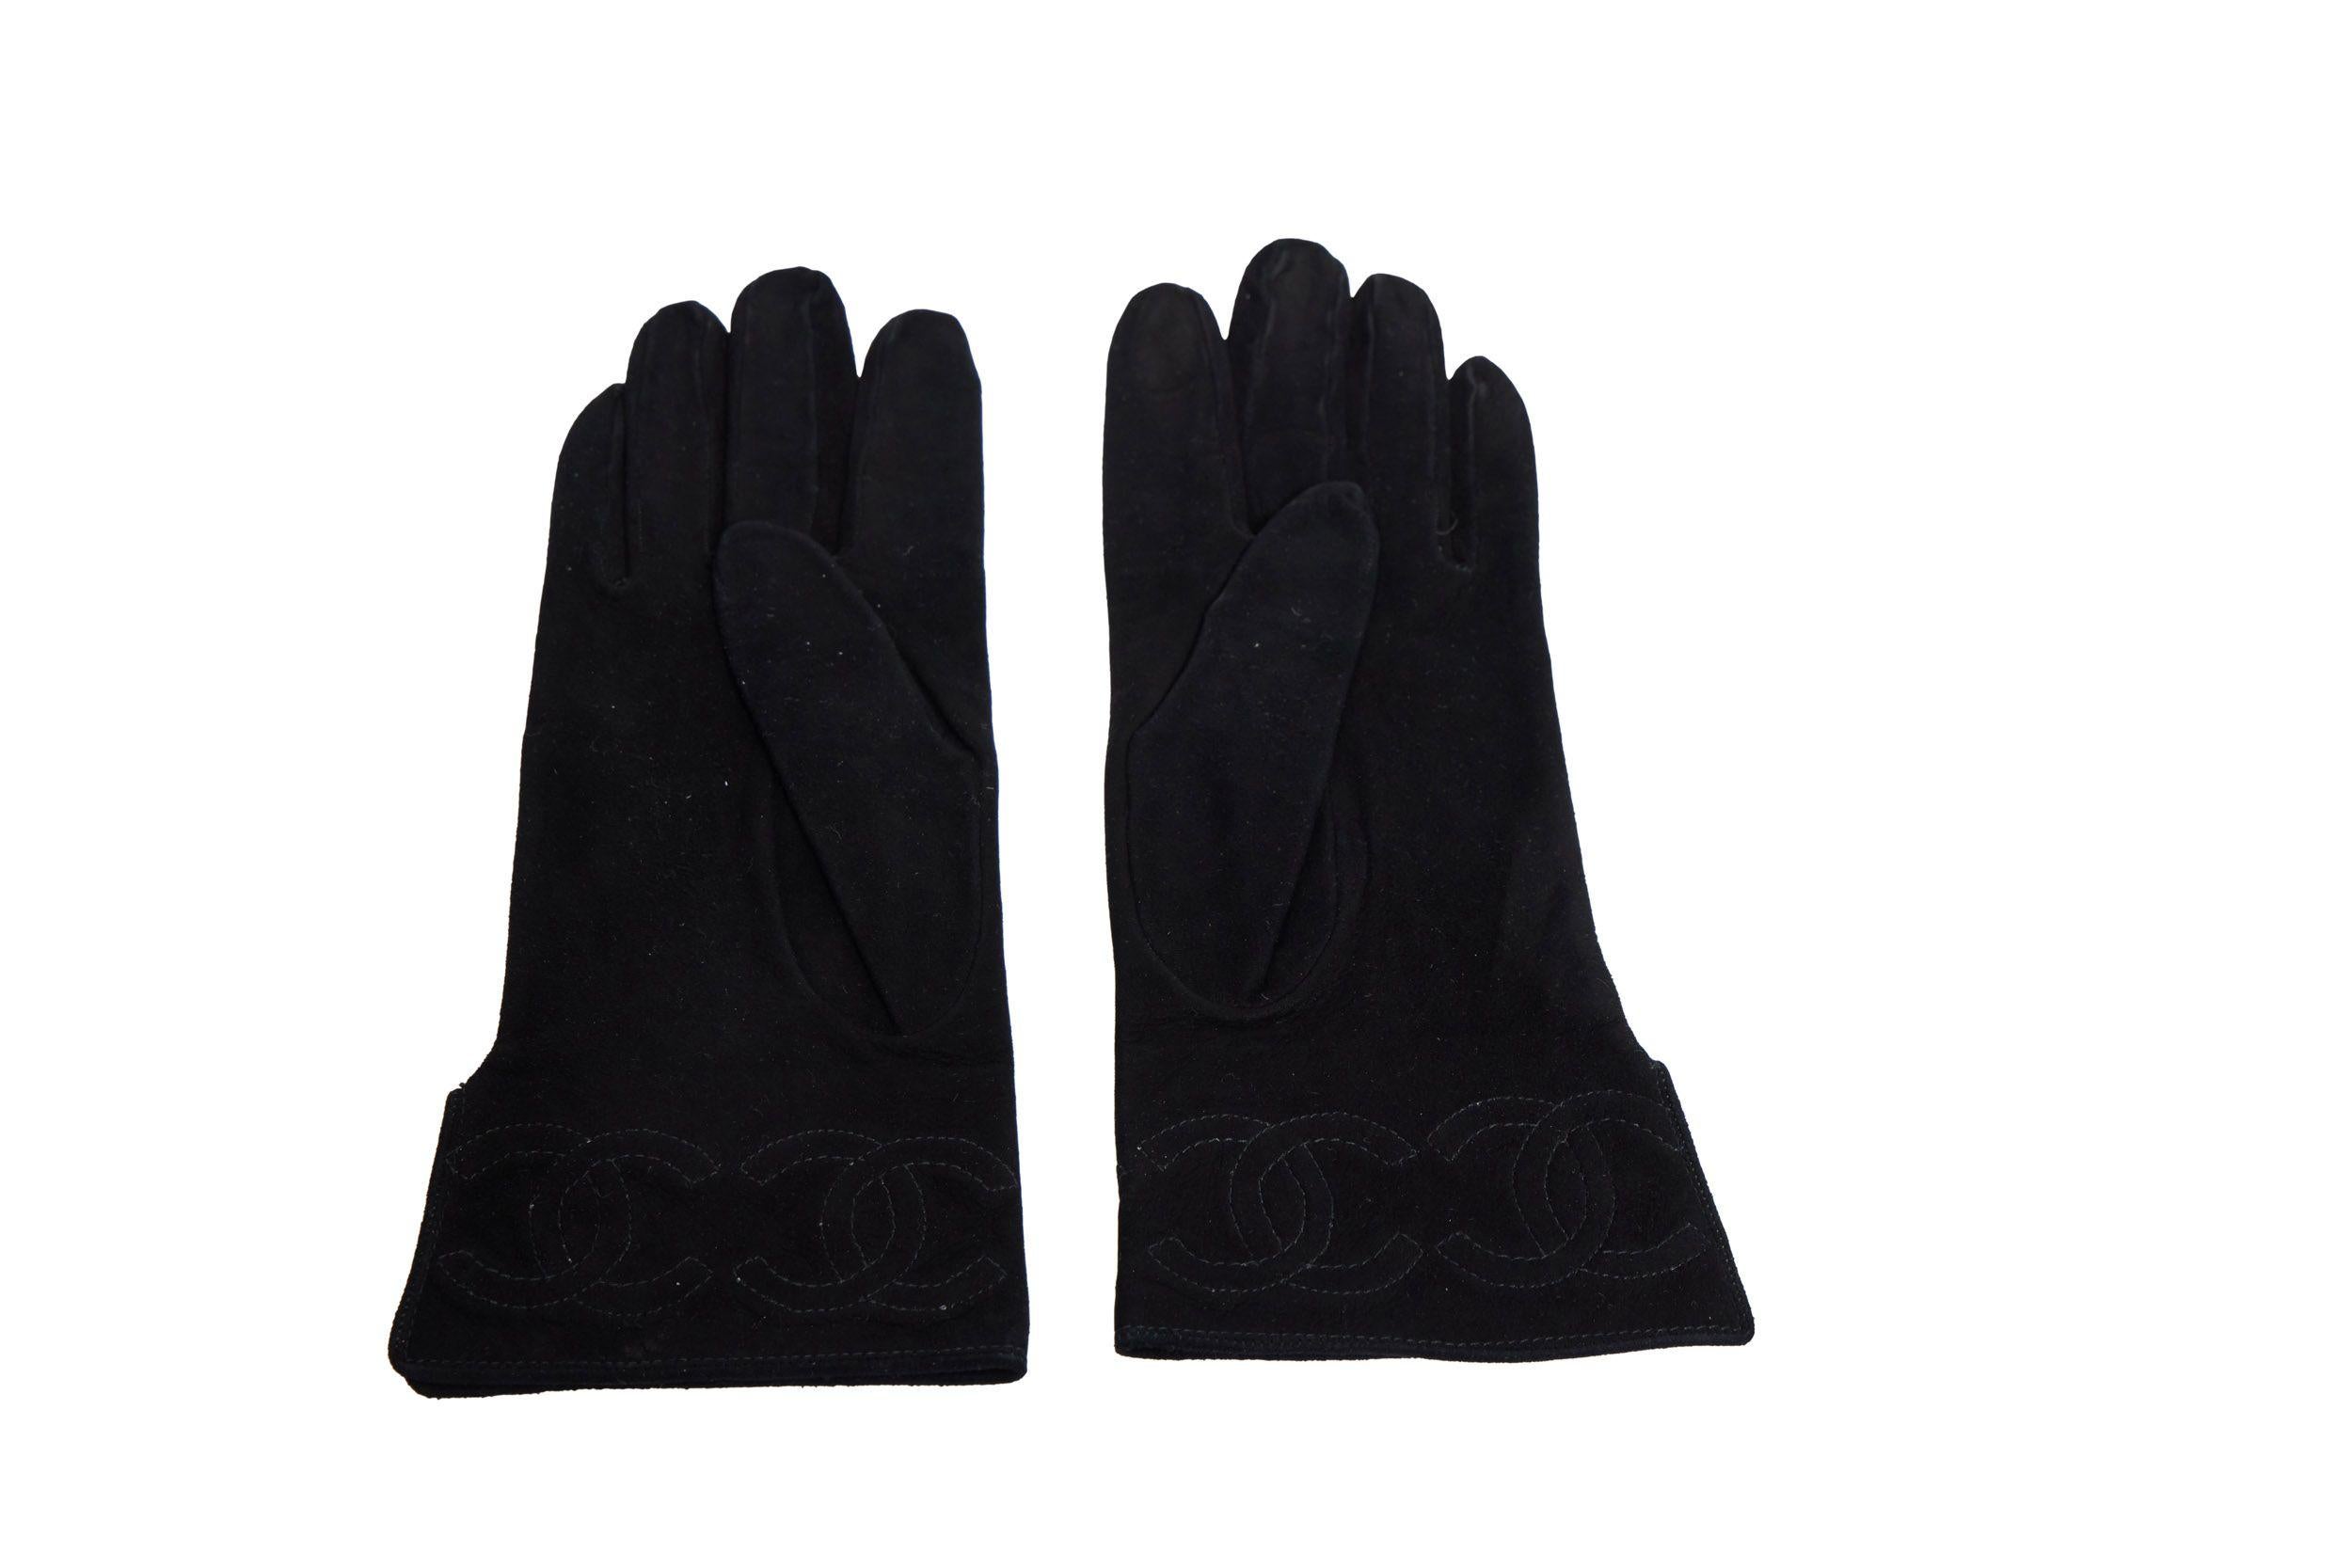 Super elegant Chanel black suede gloves with a CC logo embroidered on the edge. They come in size 7 and are brand new. The lining is made out of silk and white.
